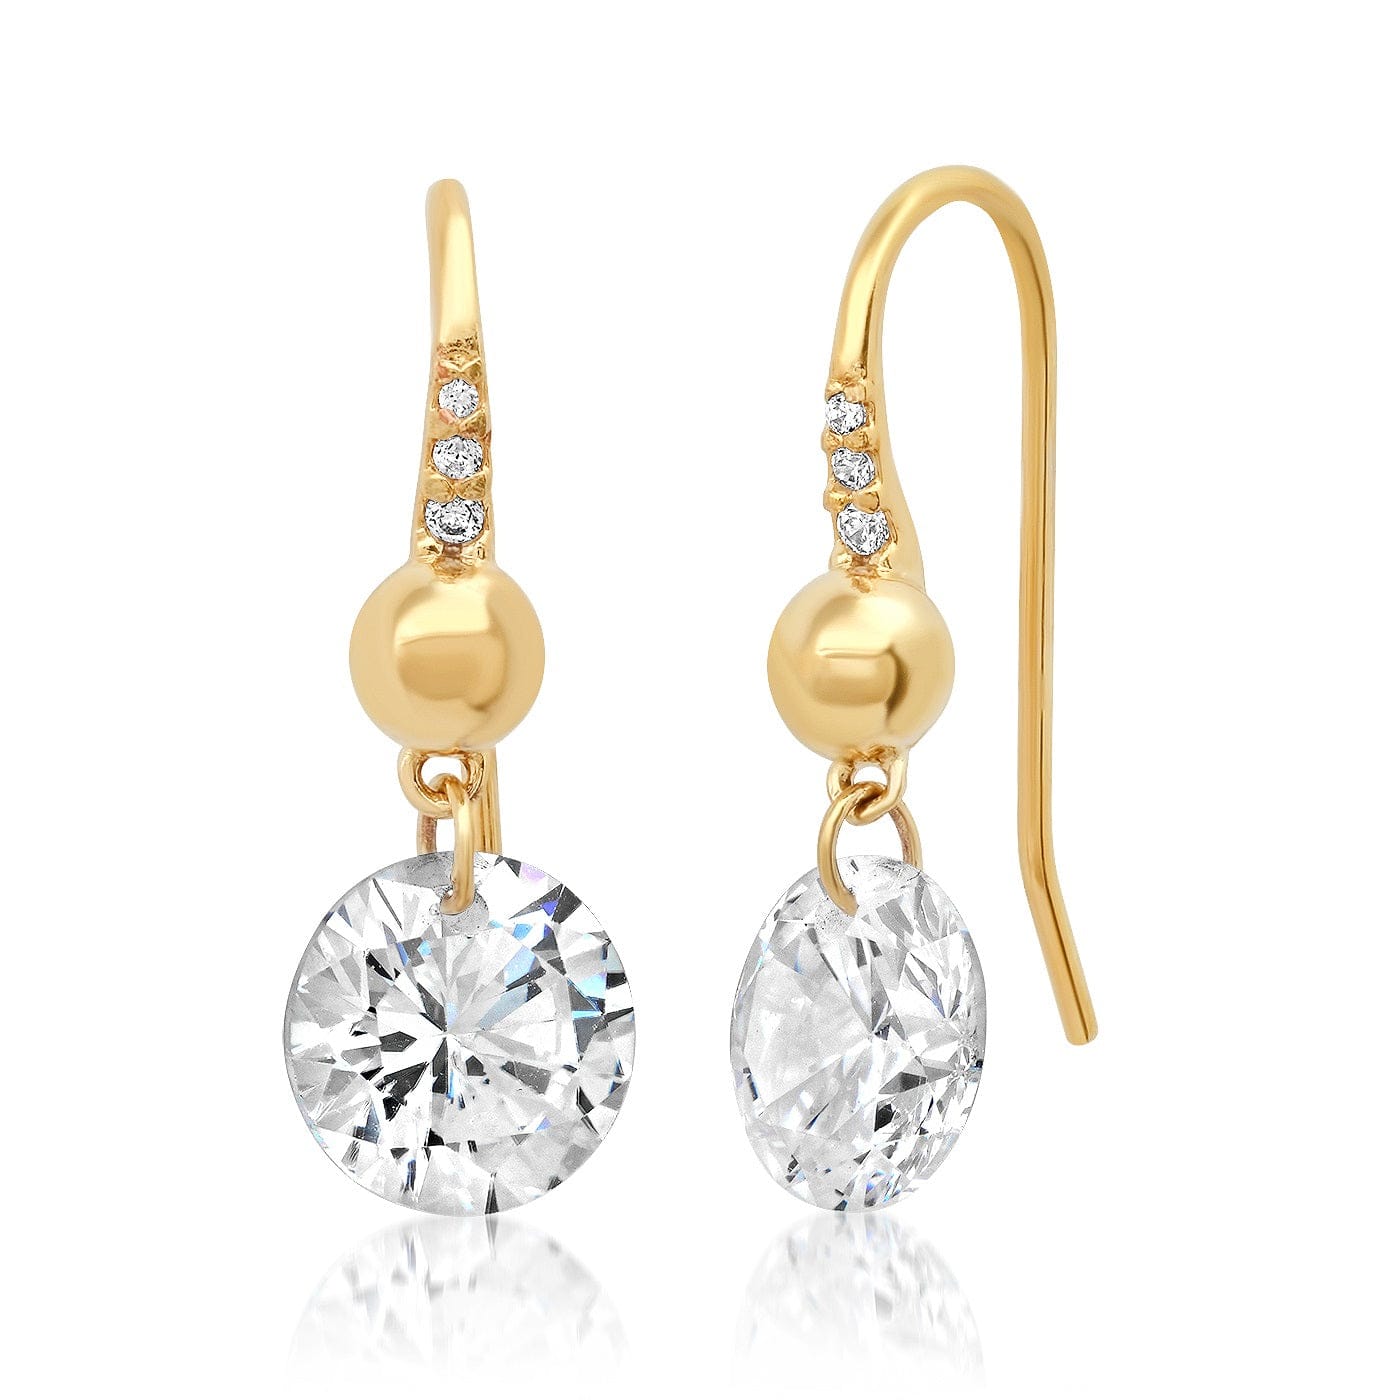 TAI JEWELRY Earrings Pave French Wire Earring With Solitaire Floating Cz